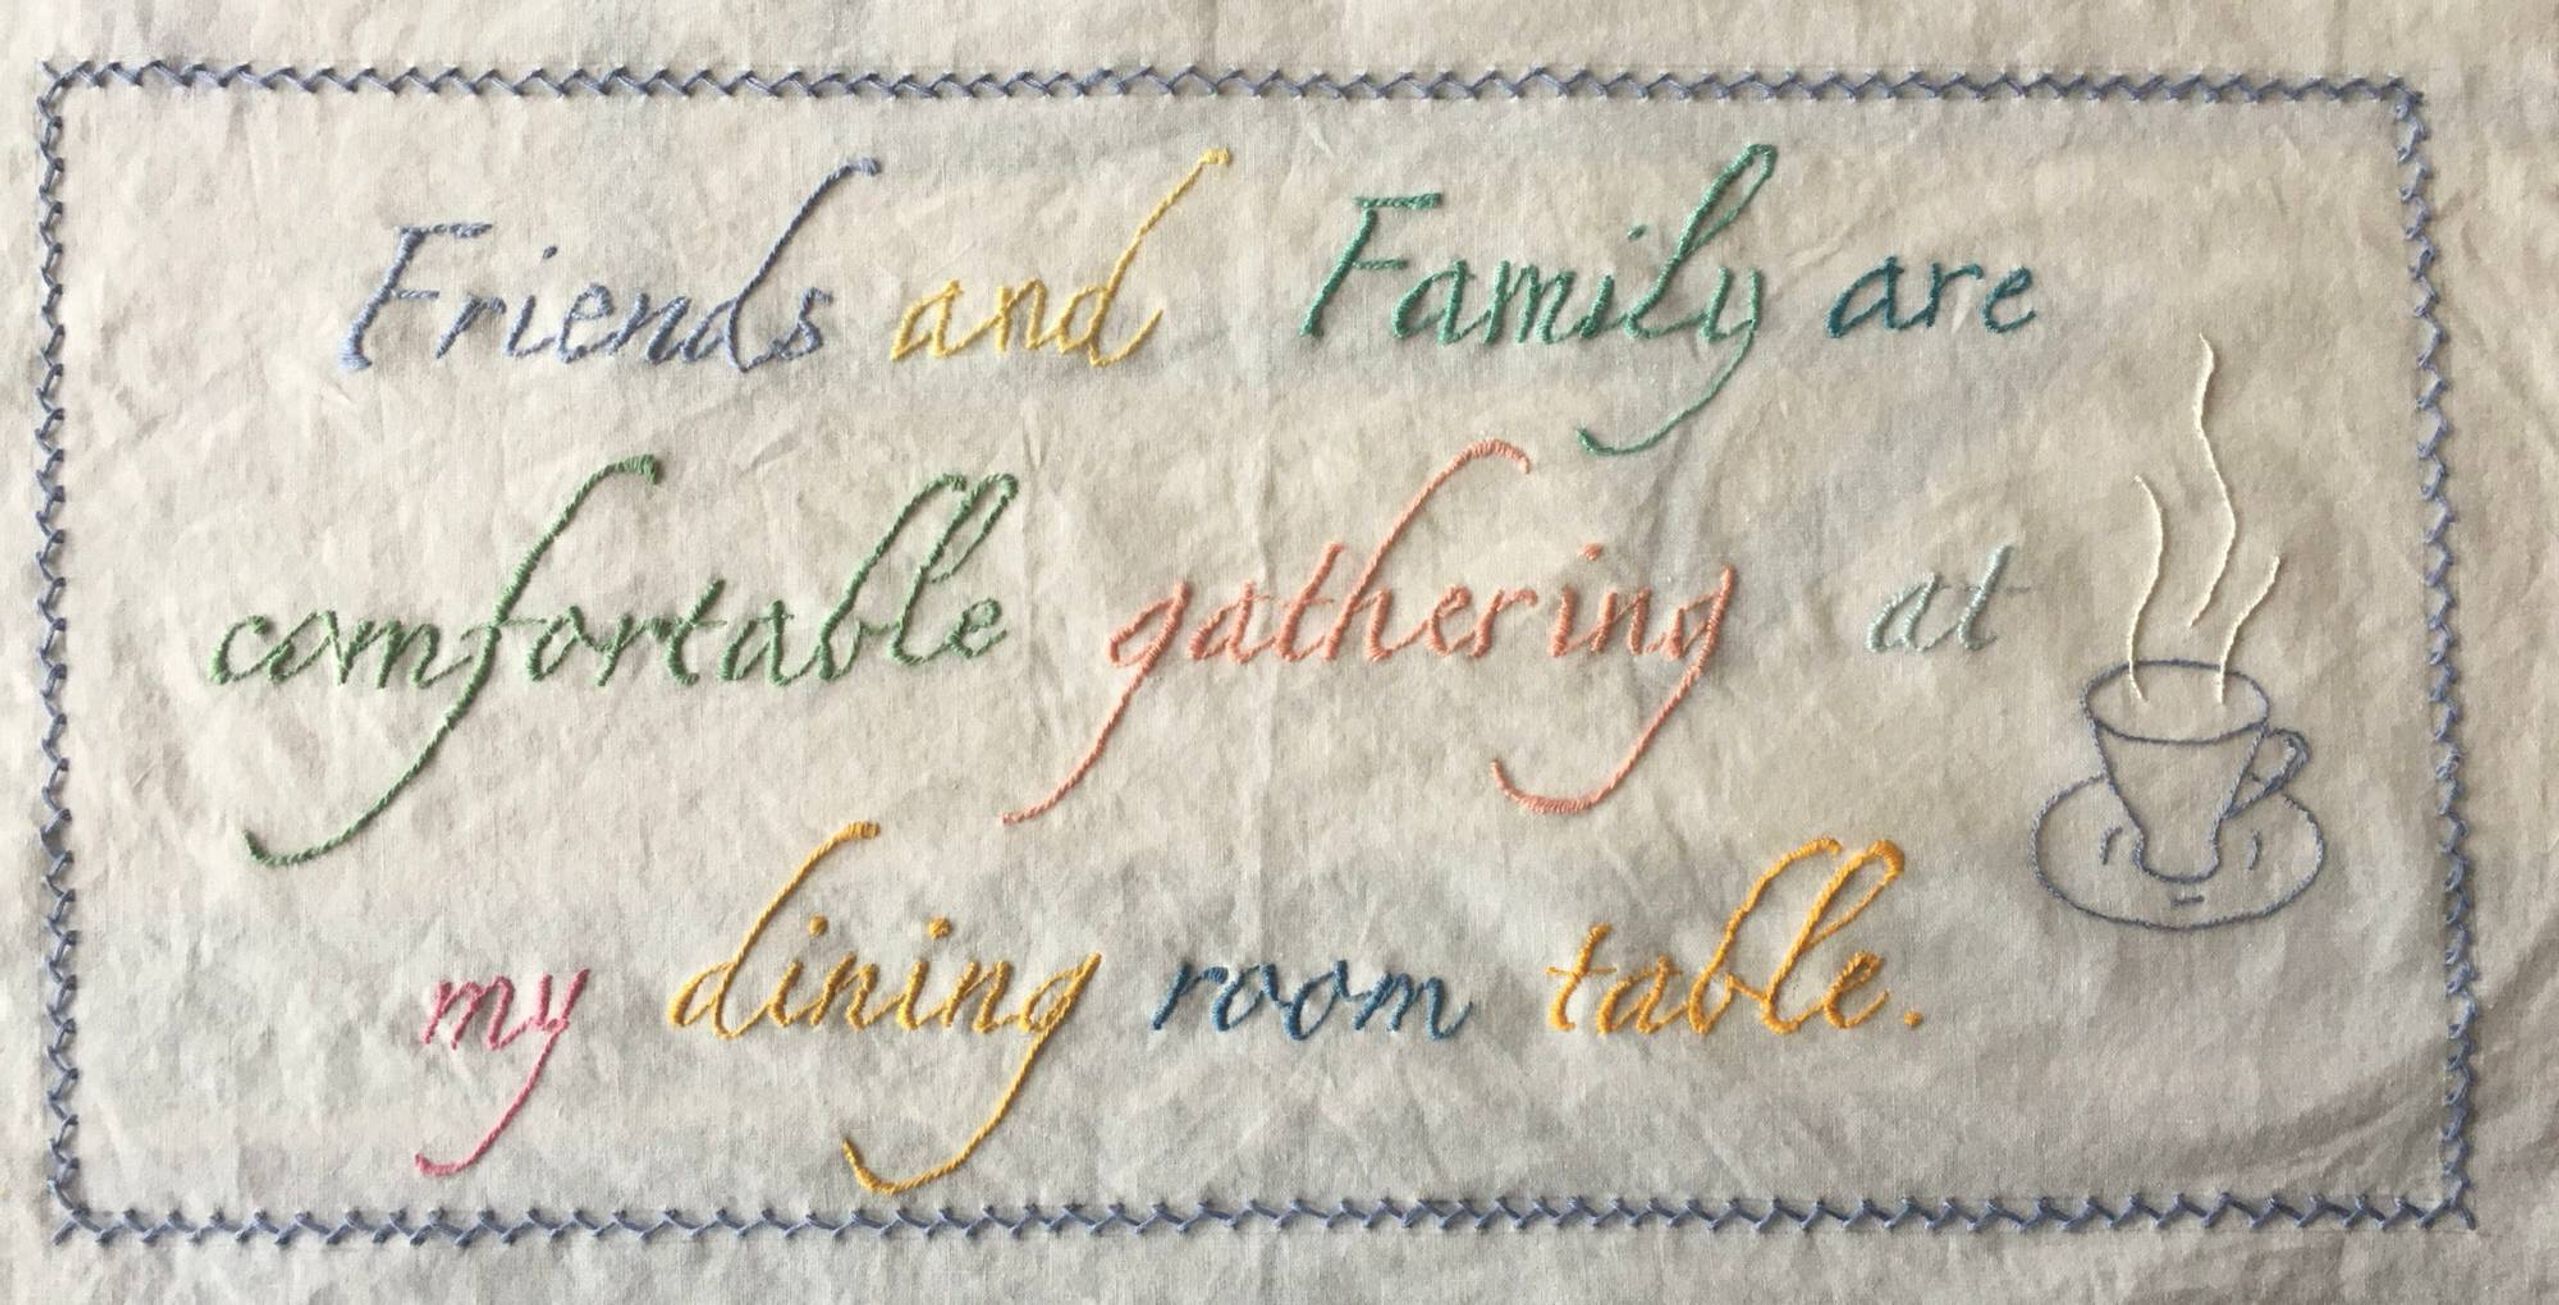 Embroidery Project 2020 example with the words - "Friends and Family are comfortable gathering at my dining room table" 